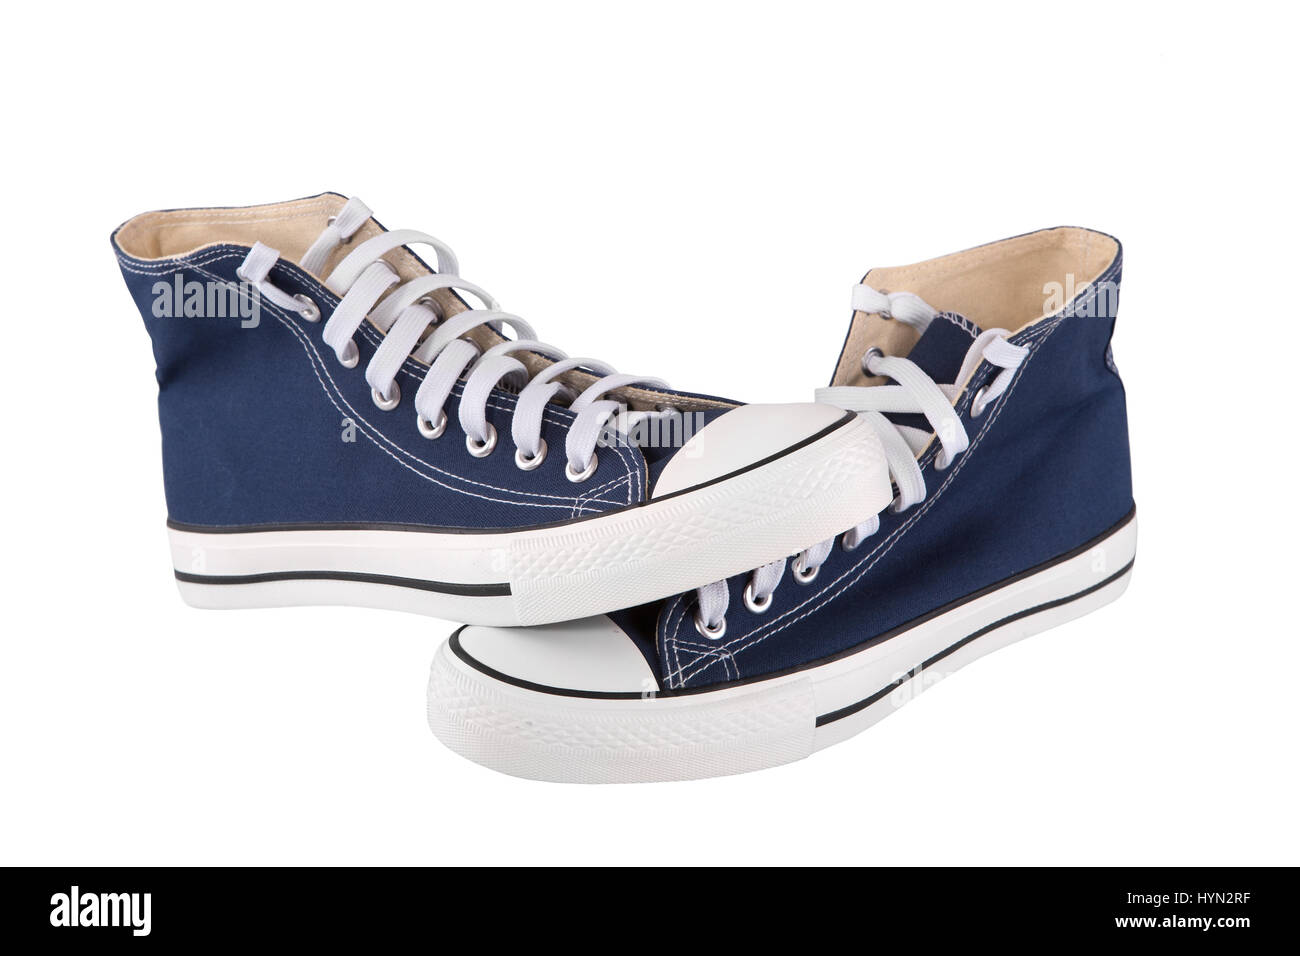 Pair of new blue sneakers on white background Stock Photo